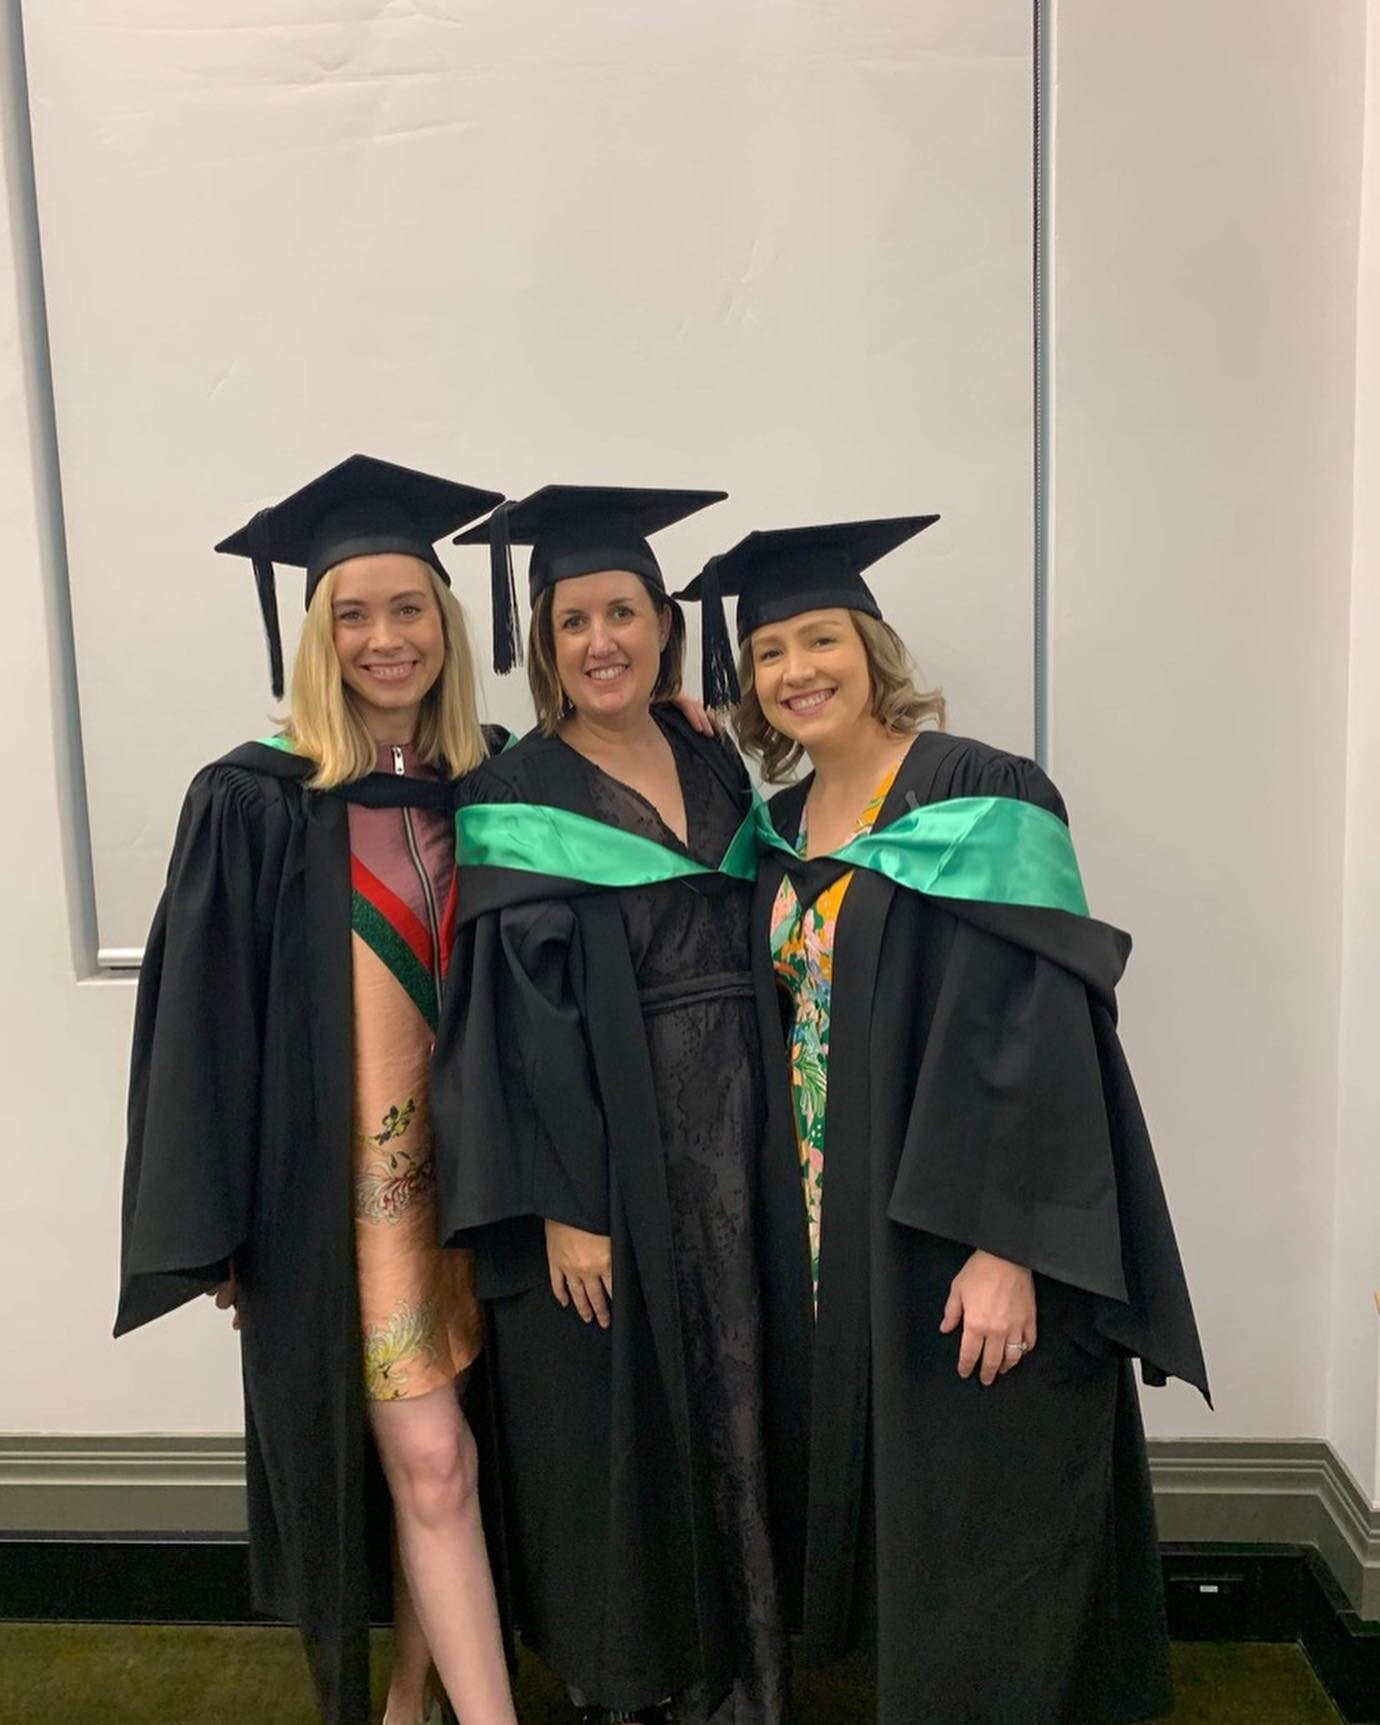 Last week I attended my graduation ceremony for completing a Bachelor of Health Science (Naturopathy). I didn&rsquo;t manage to capture a solo photo, but am fortunate to have some with lifelong friends.

I&rsquo;ve written before about the journey it